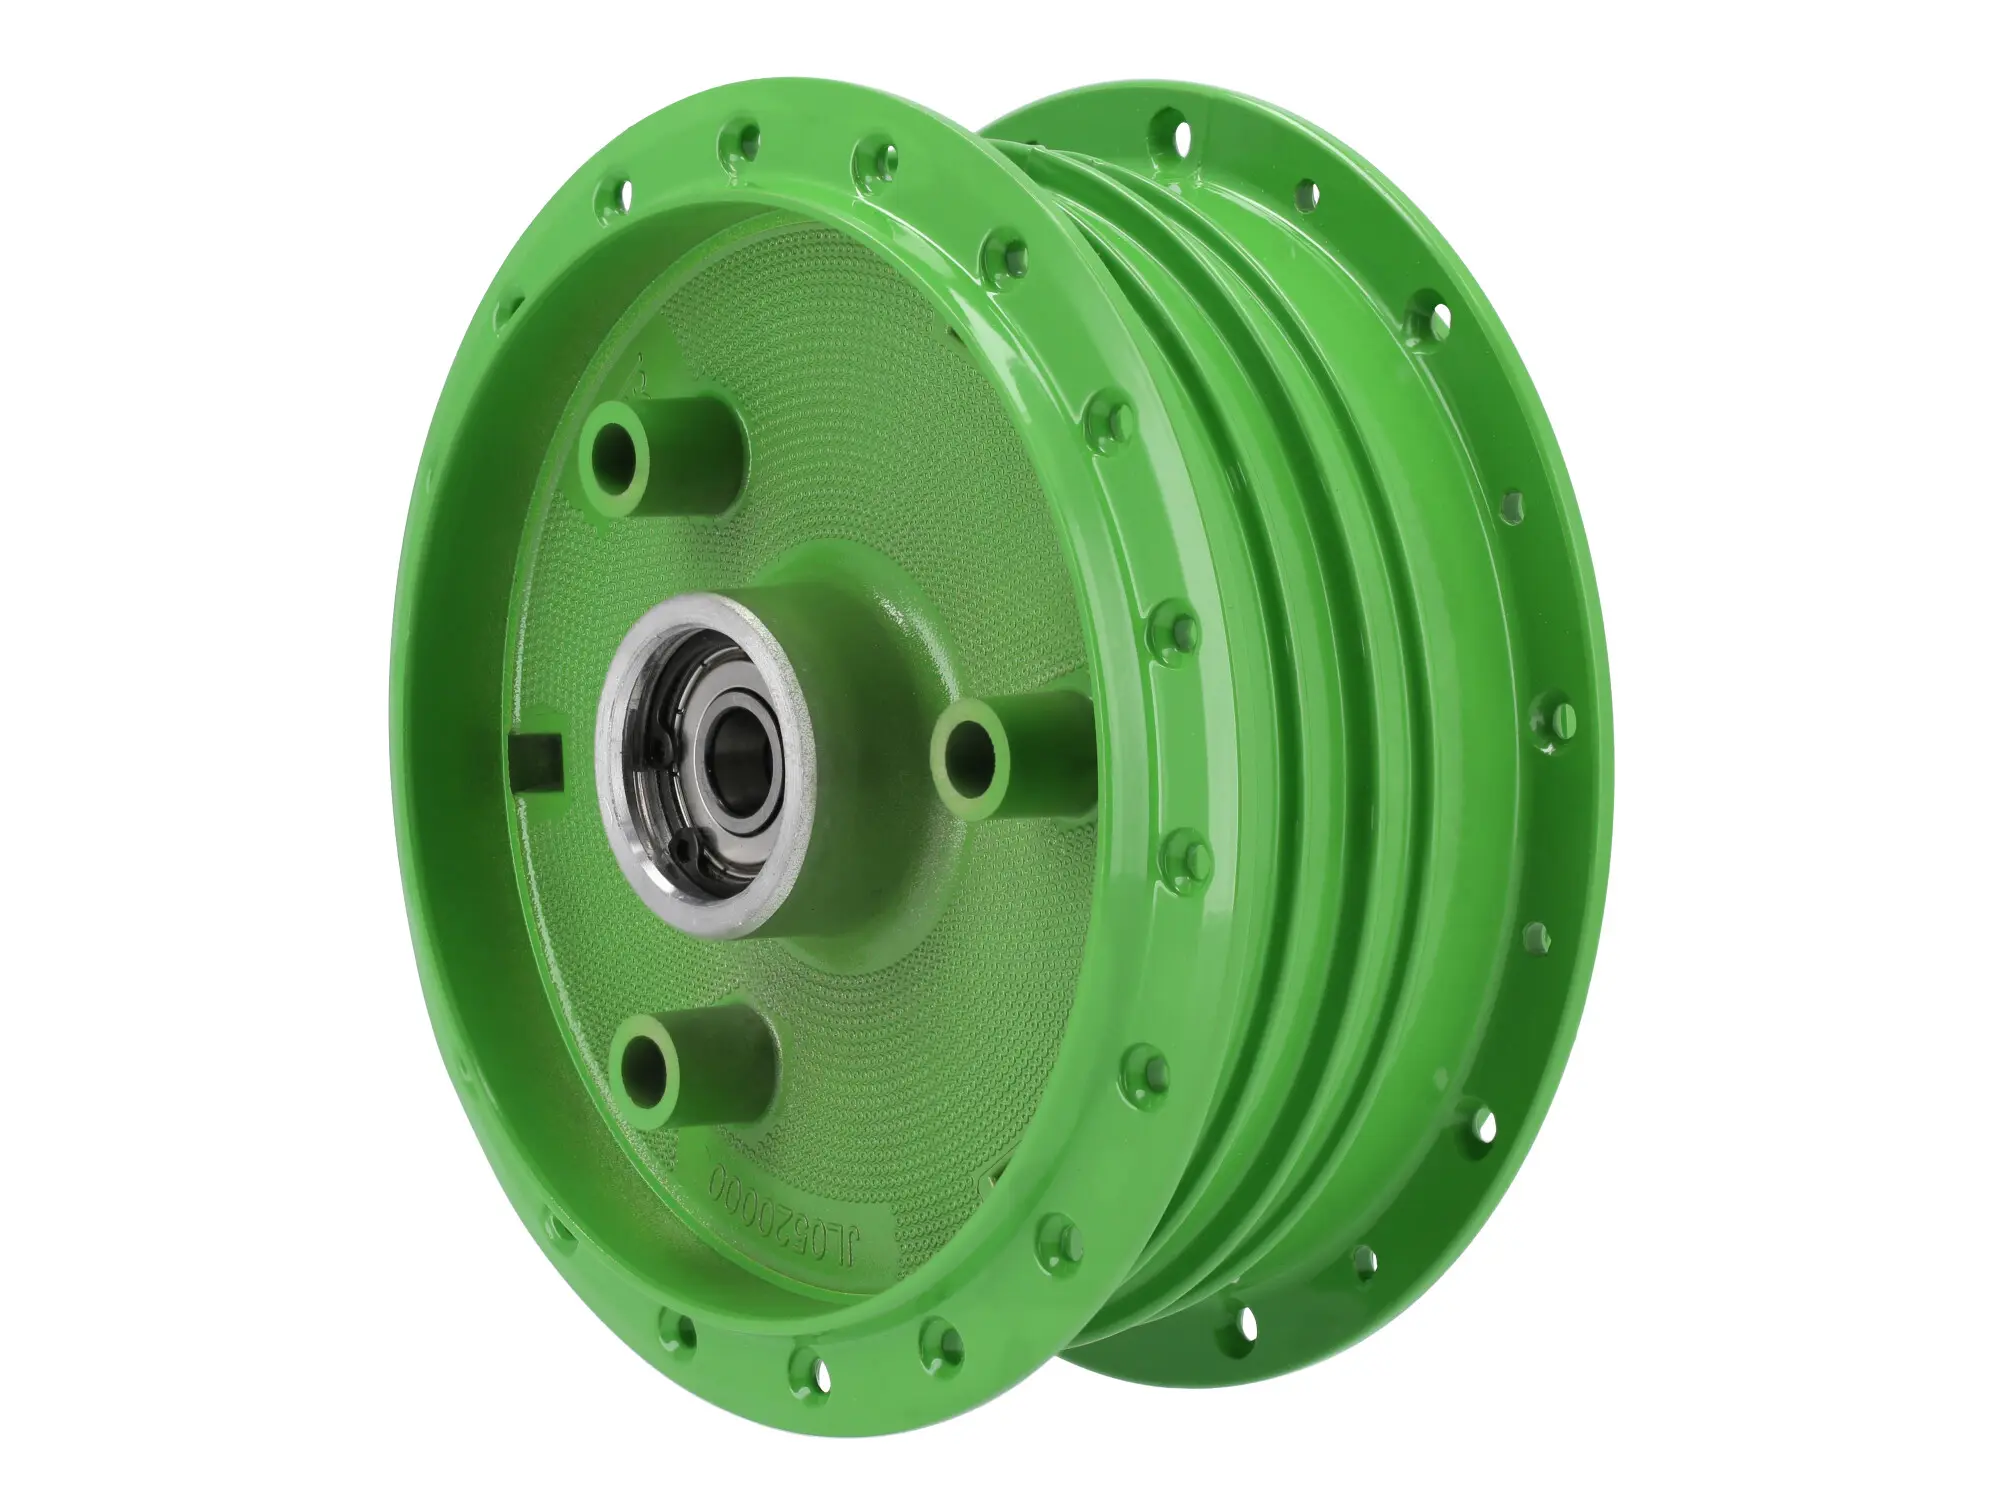 Wheel hub light green, with mounted bearings, reinforced wheel sleeve - for Simson S50, S51, S70, KR51 Schwalbe, SR4, Duo4, Item no: 10072874 - Image 1